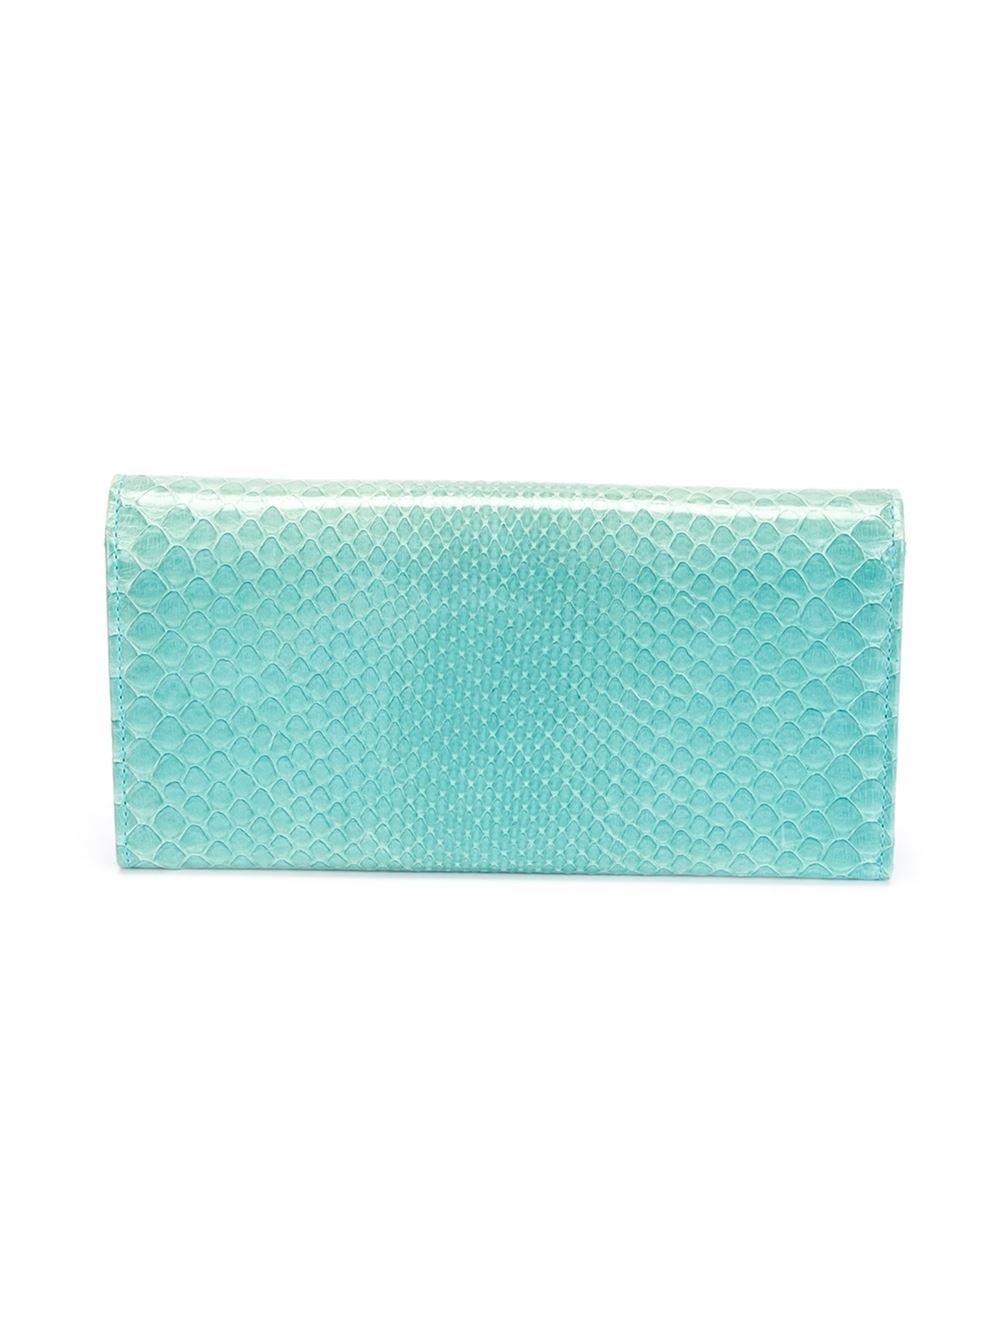 This mint green python skin continental wallet from Christian Dior features a foldover top with snap closure, a zipped coin pouch, multiple interior card slots and an embossed internal logo stamp.

Colour: Mint Green

Material: